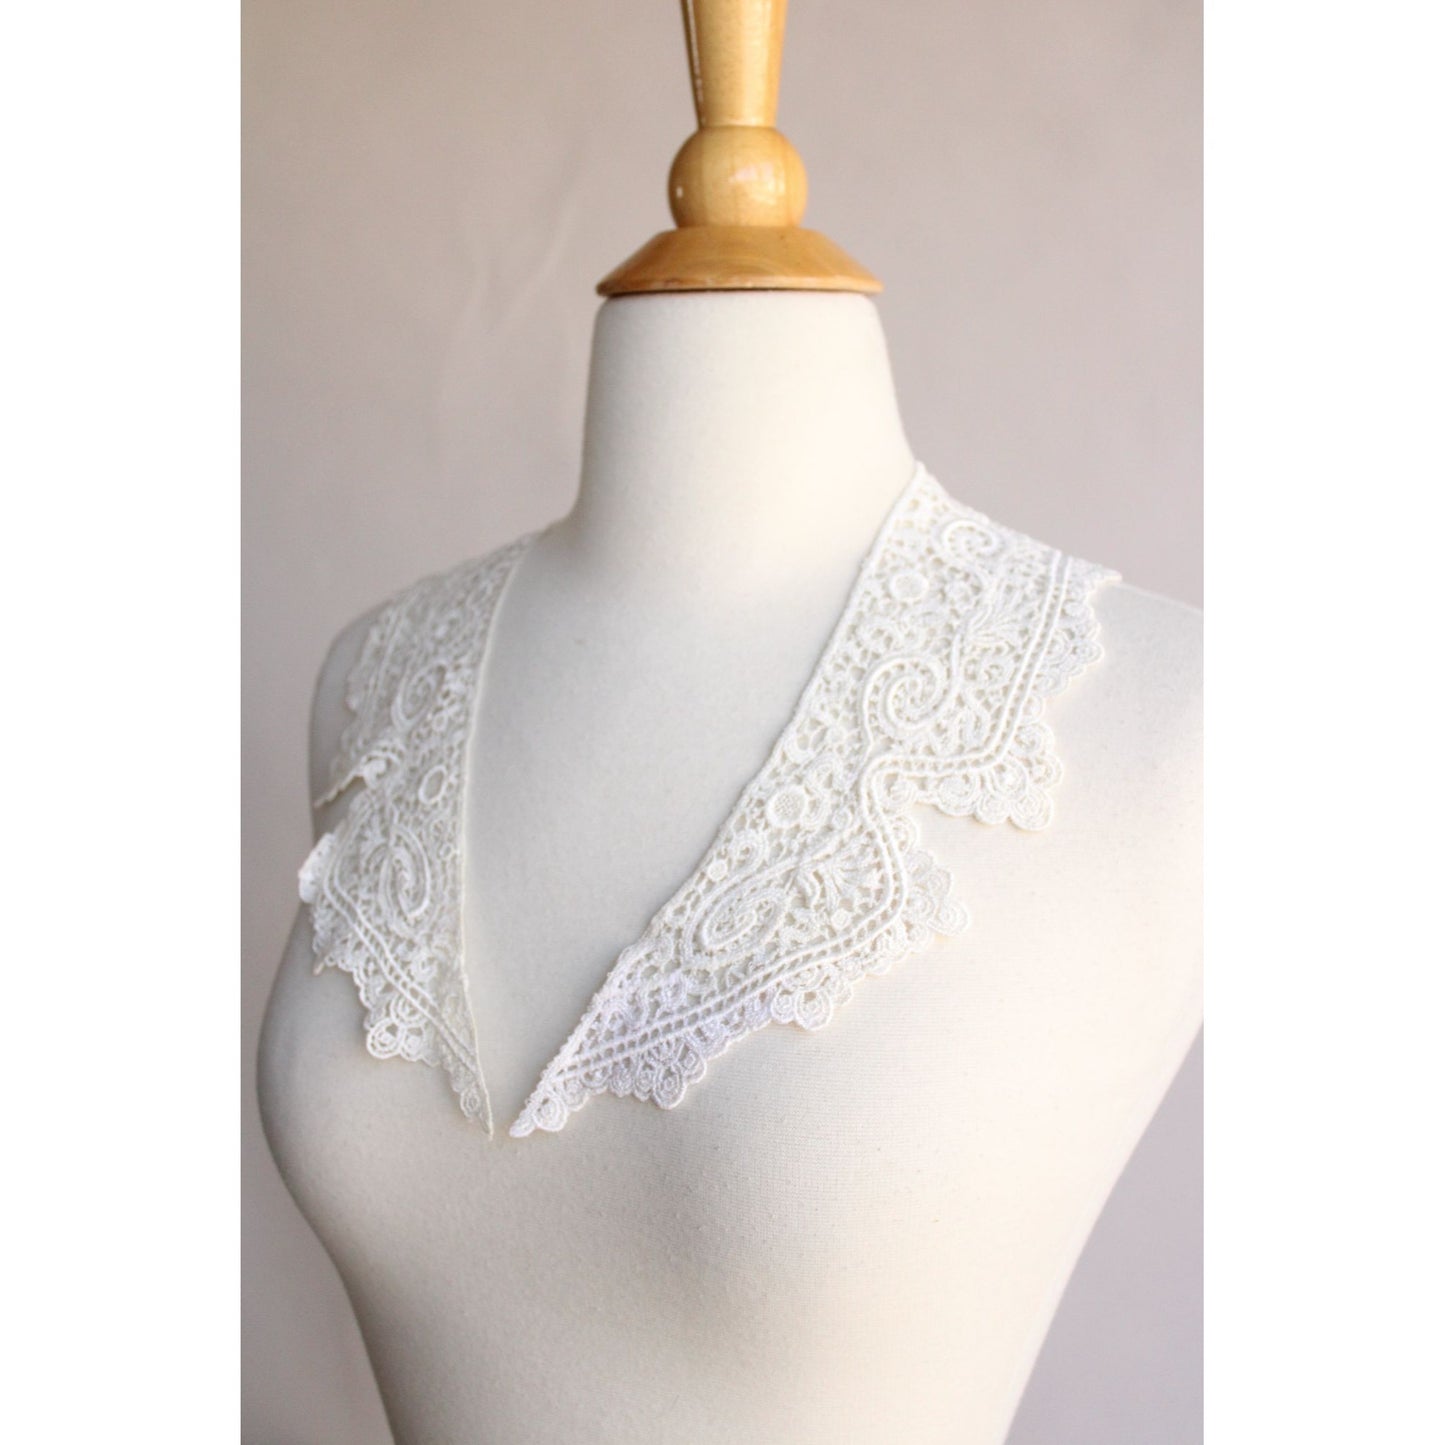 Vintage Pair of 12" Long Collar Ivory Lace Appliques